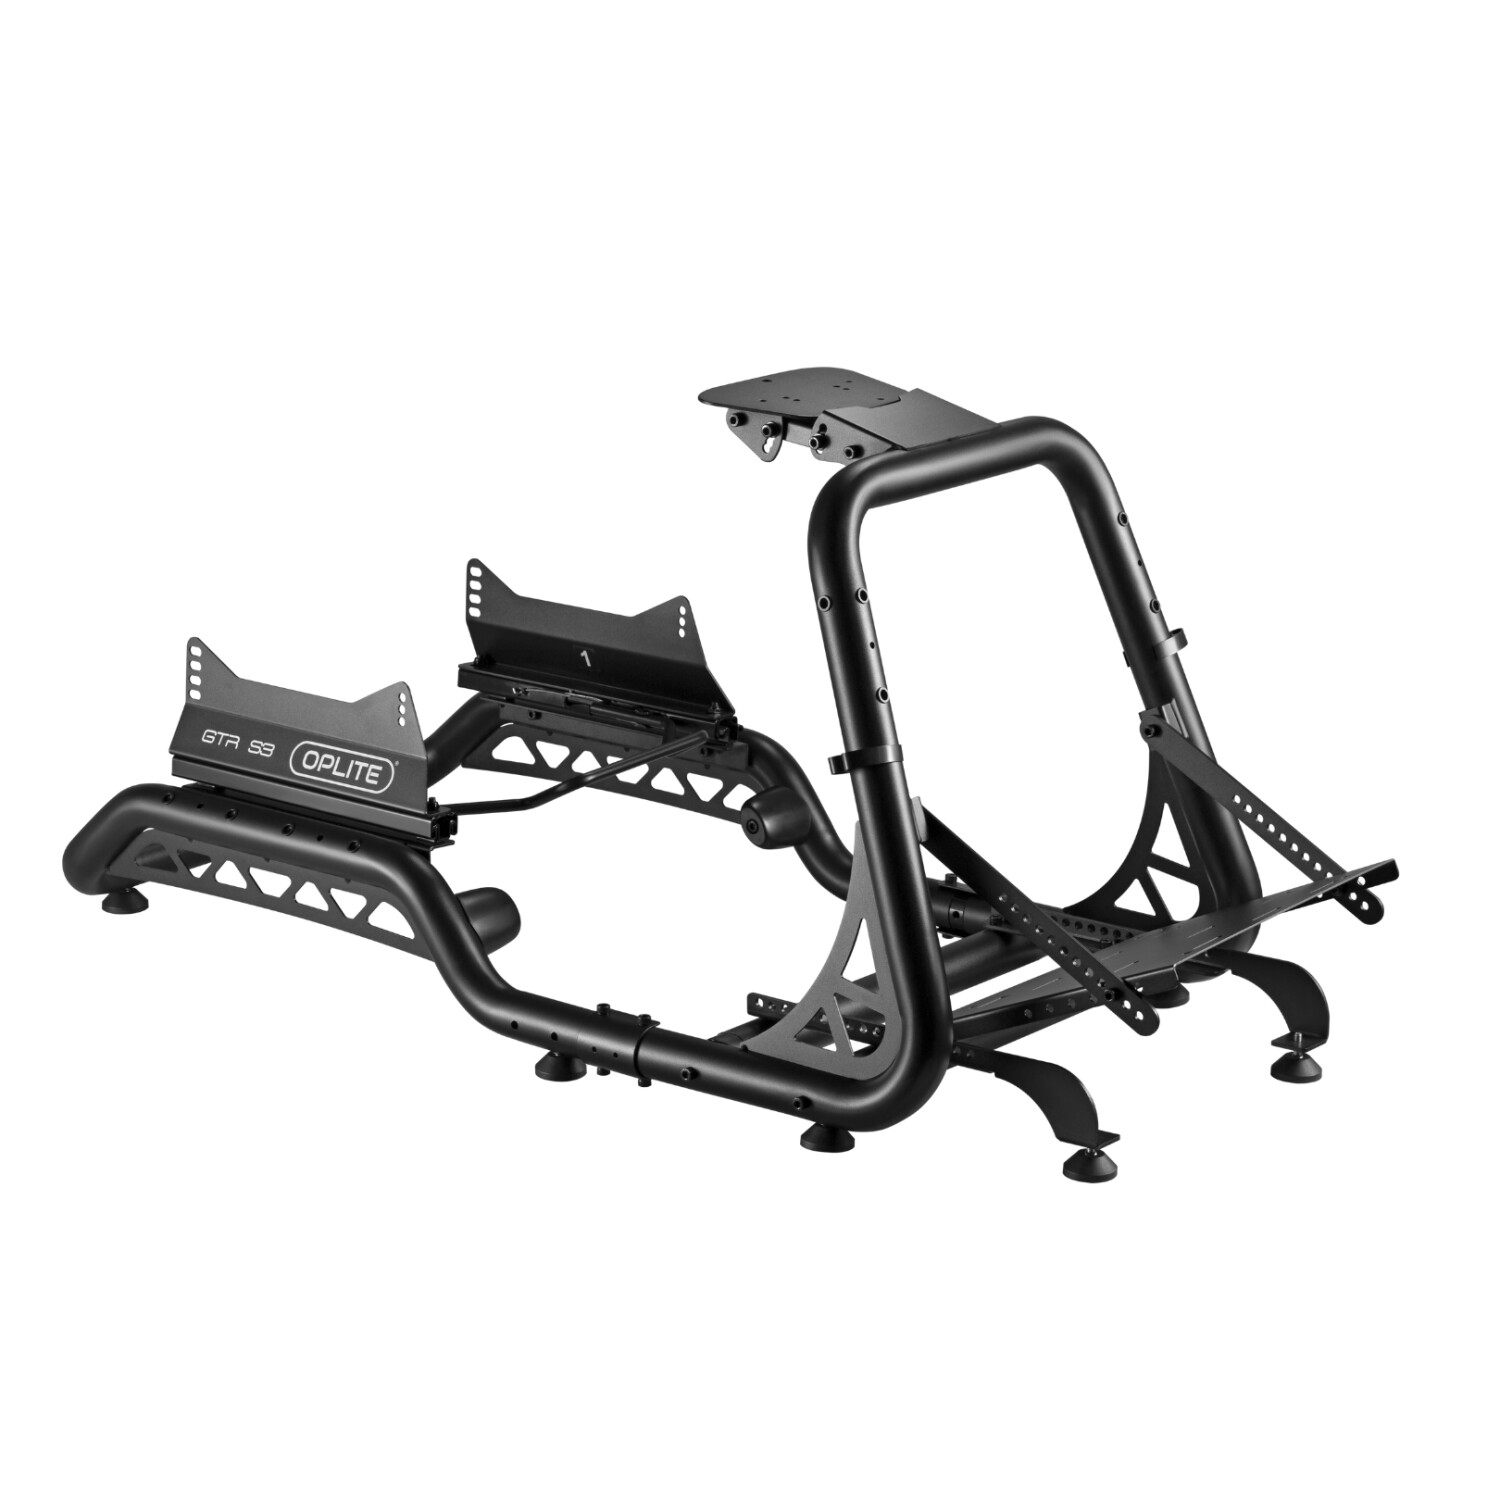 Oplite GTR S3 Chassis ab 408,16 €